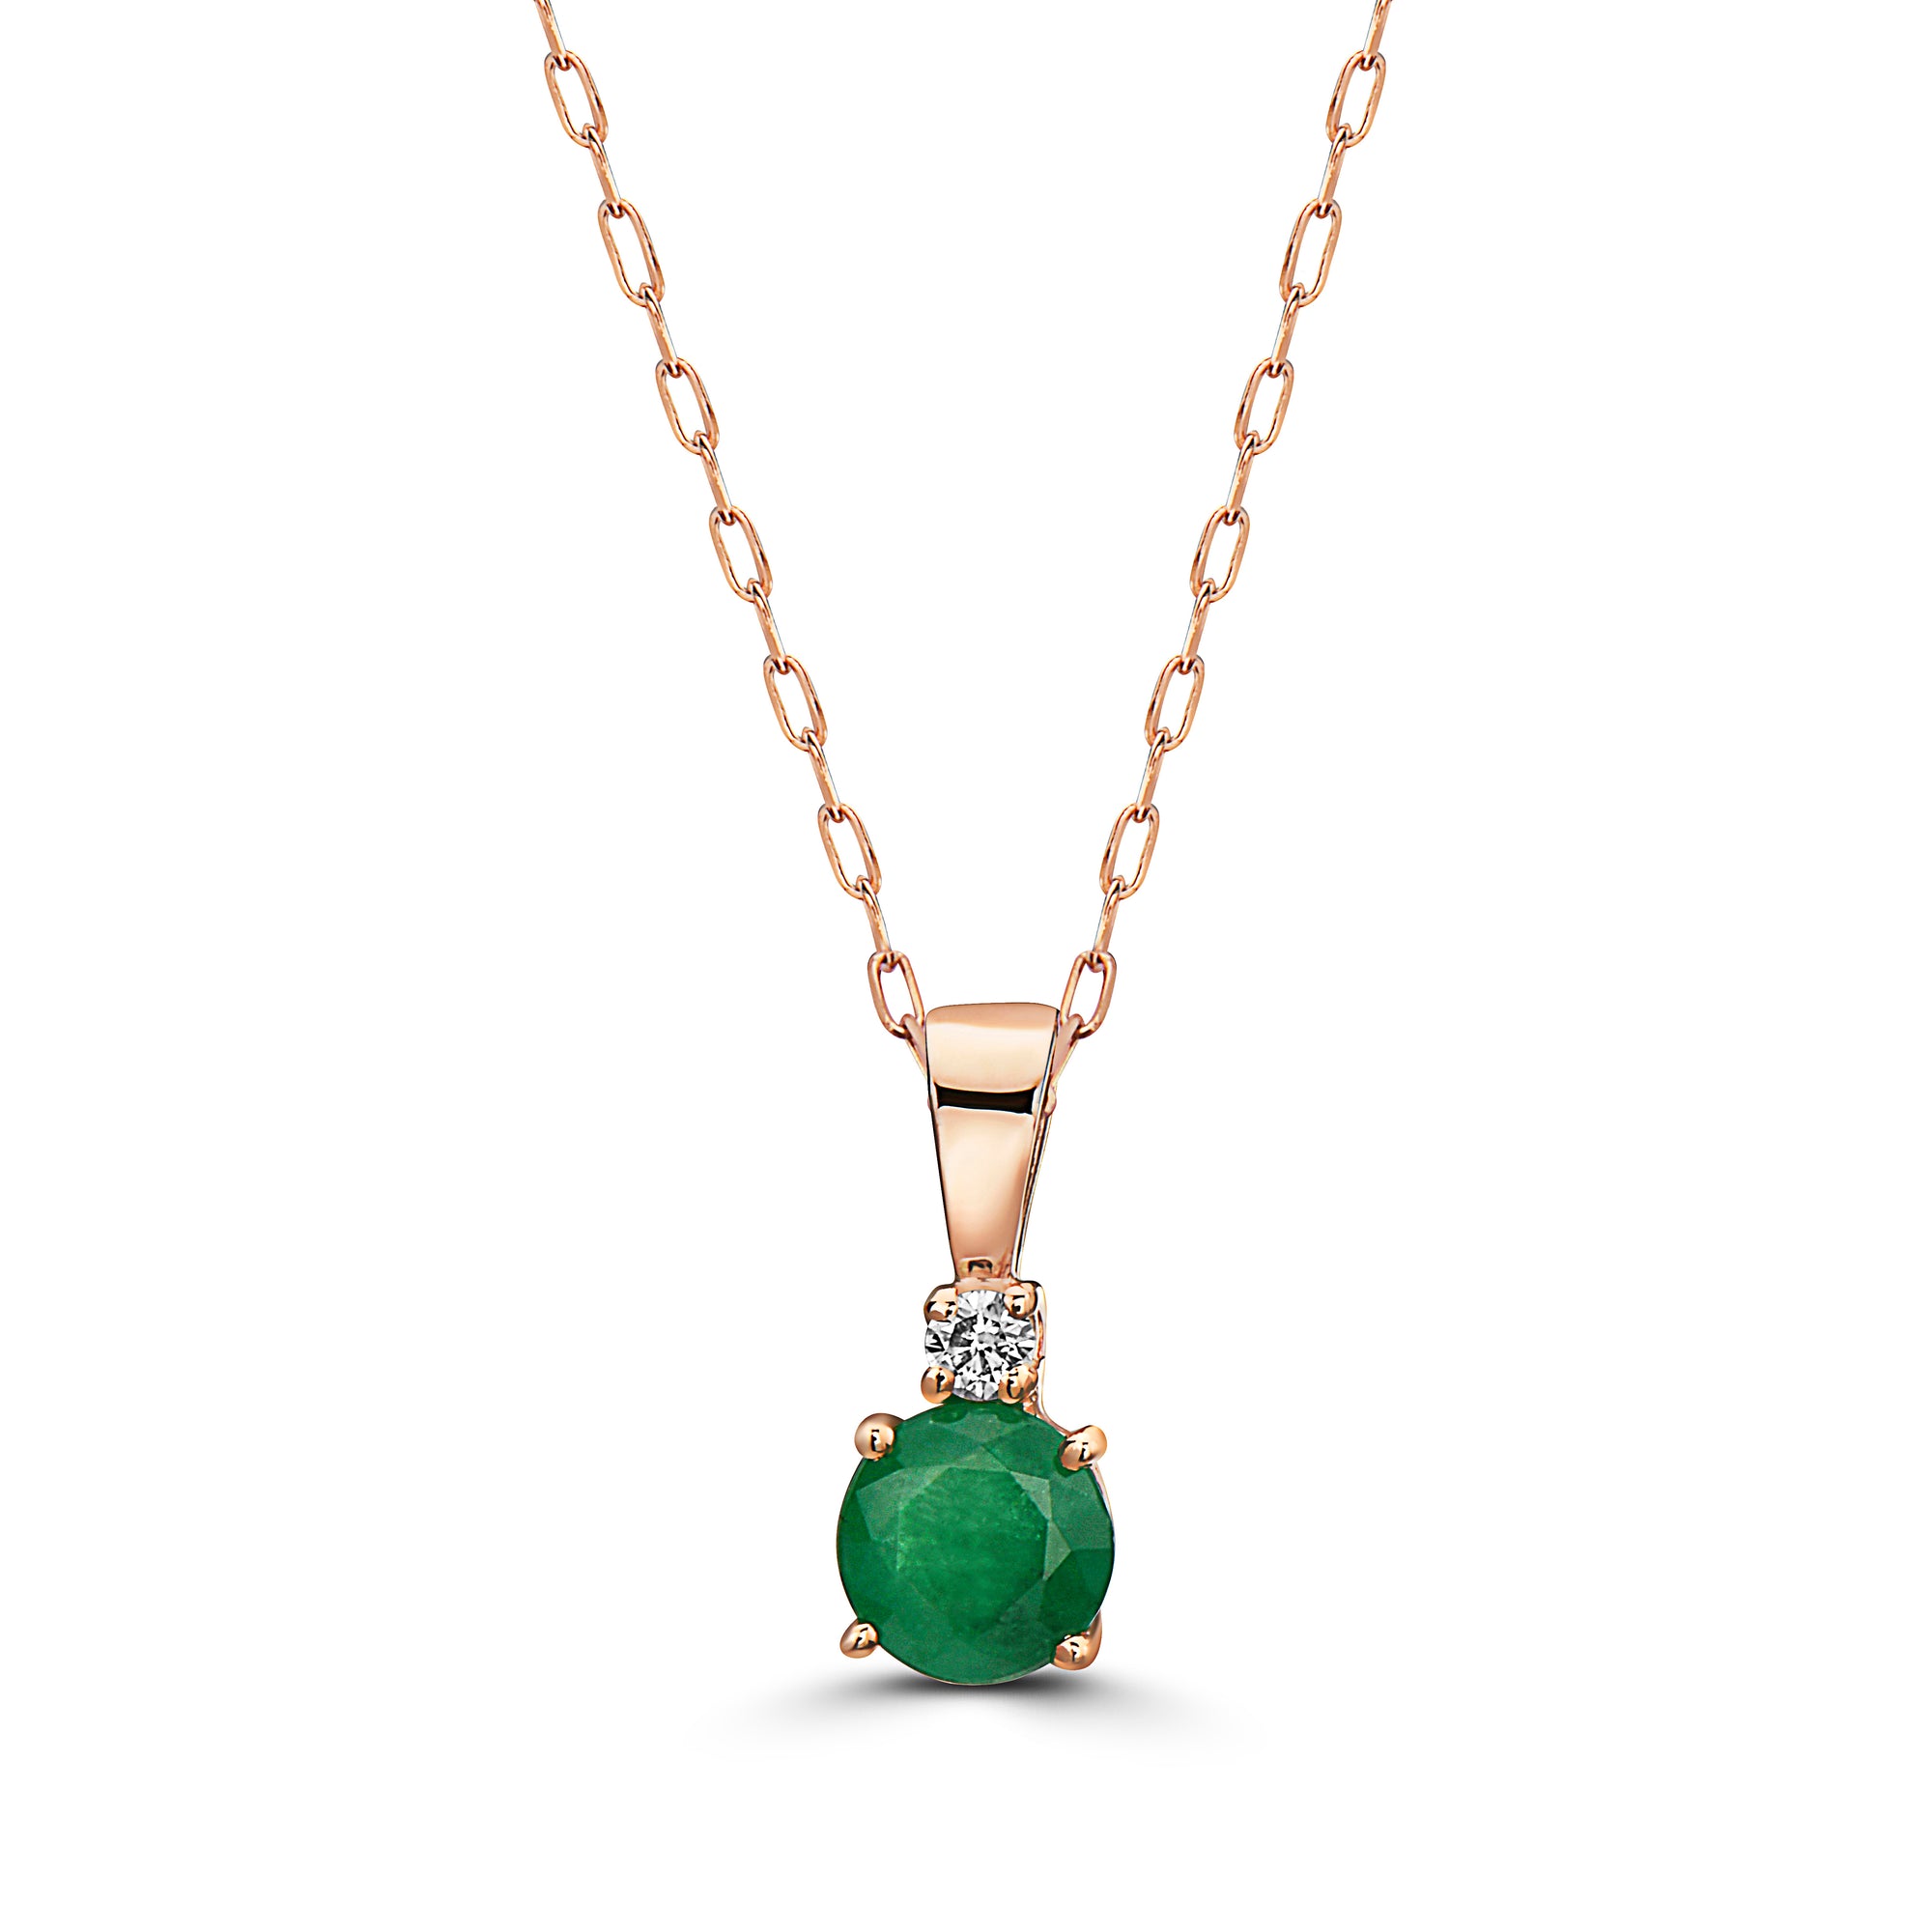 Birthstone Pendant 1 cts Natural Green Emerald, Nude Diamonds, in 14K Rose Gold